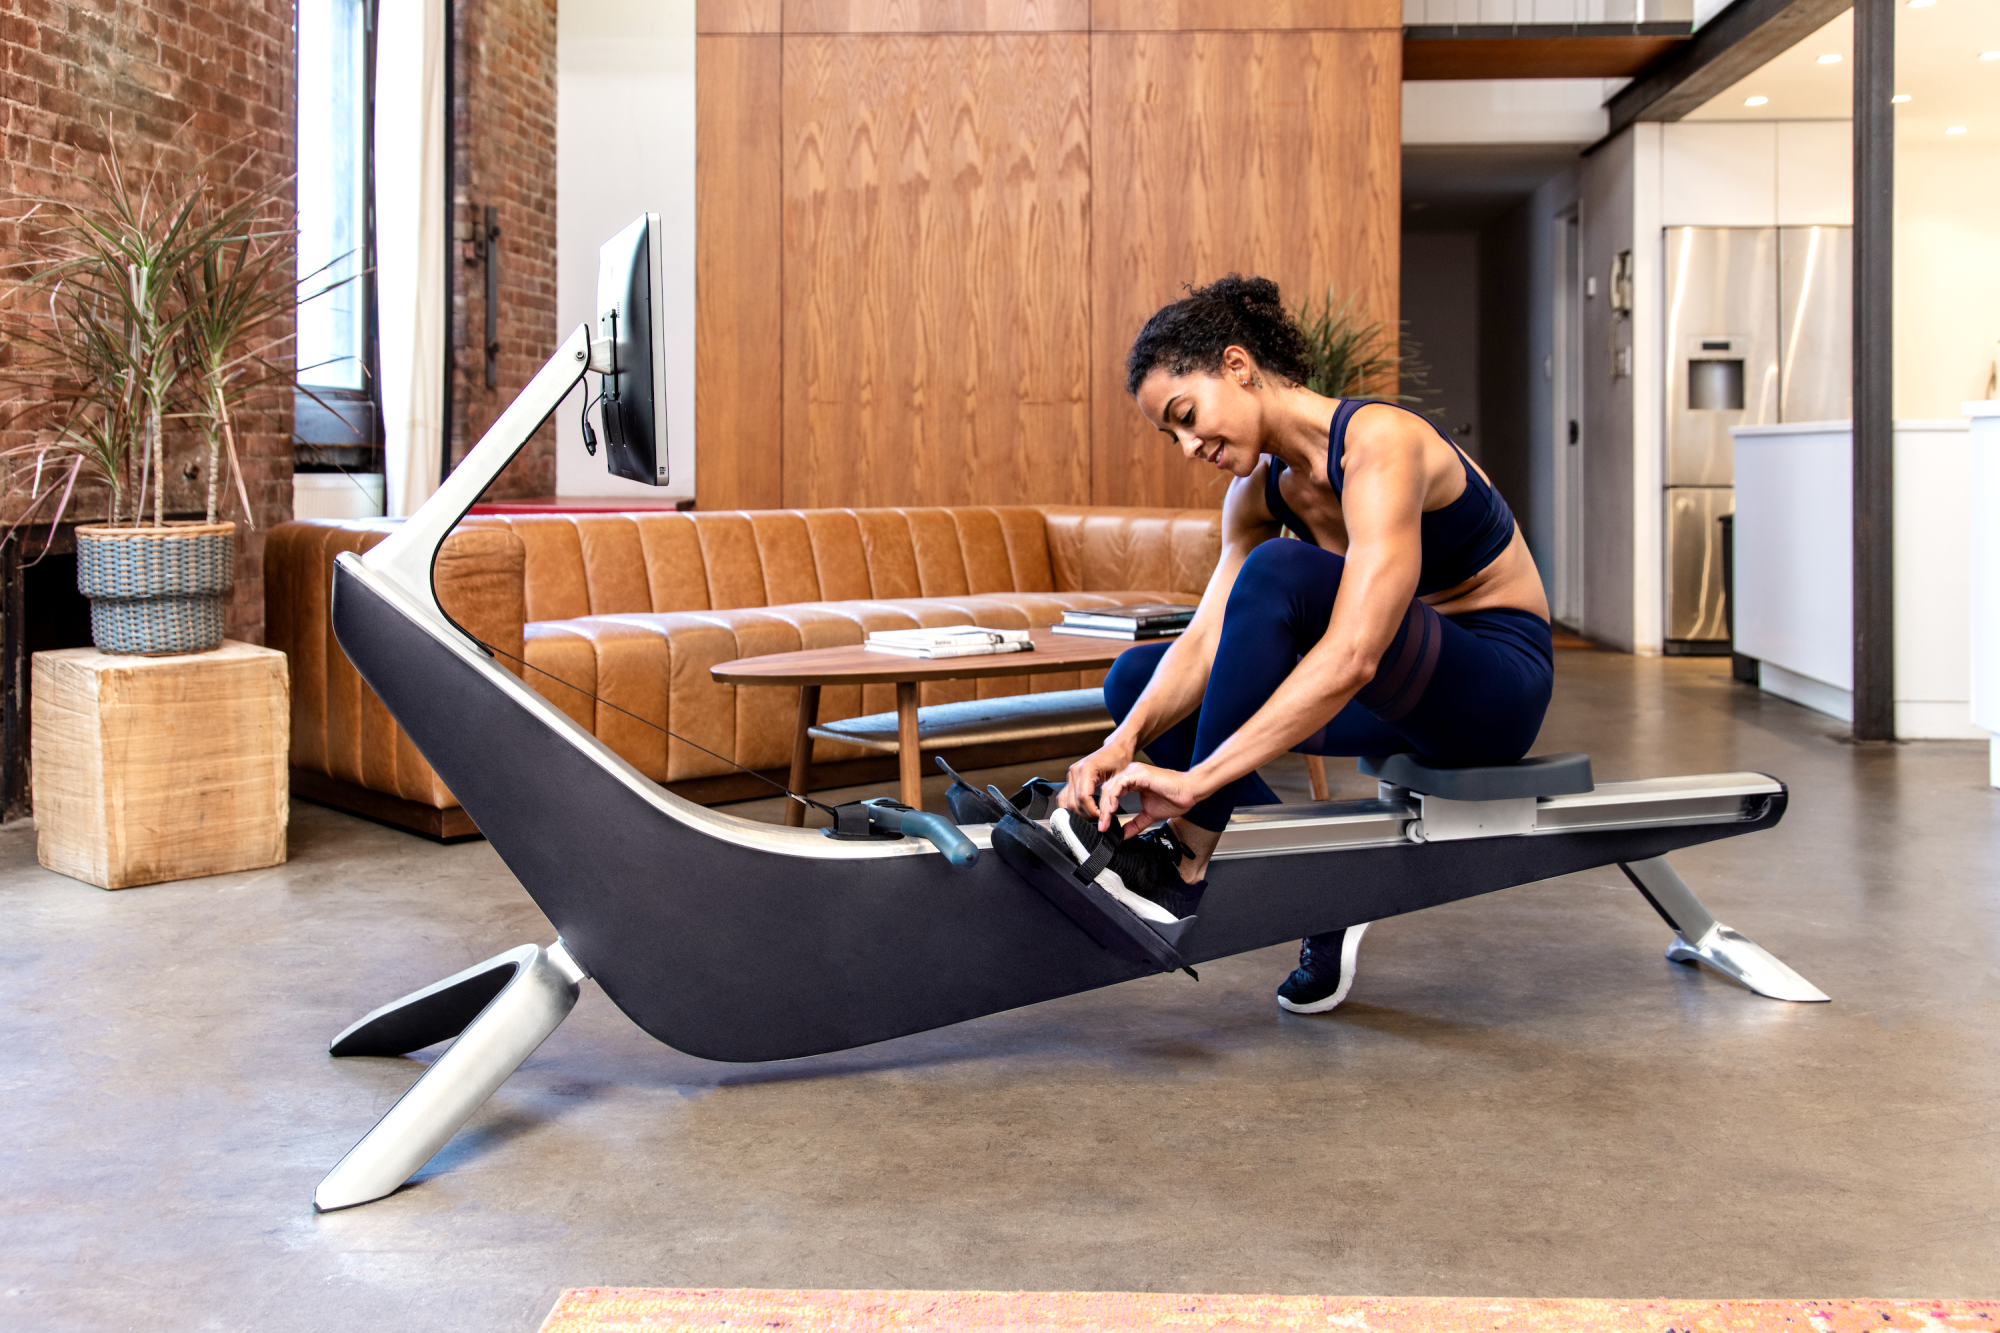 The 6 Essentials Runners Need to Build the Perfect Home Gym